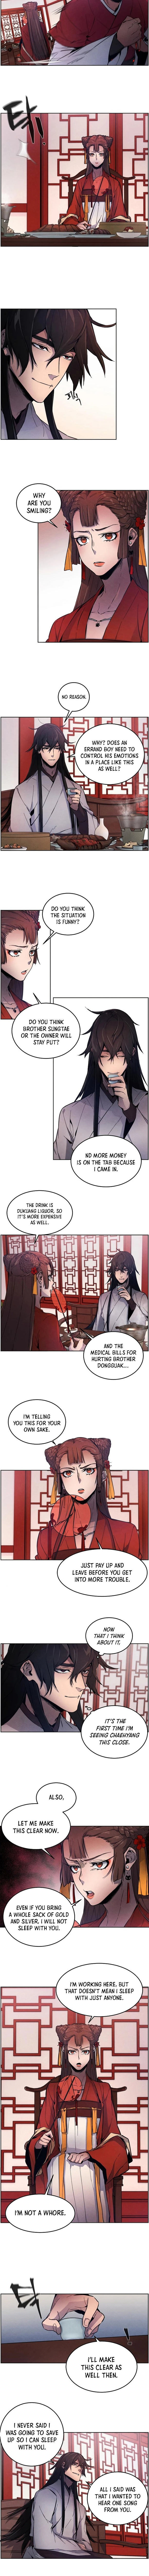 the-return-of-the-crazy-demon-chap-3-6